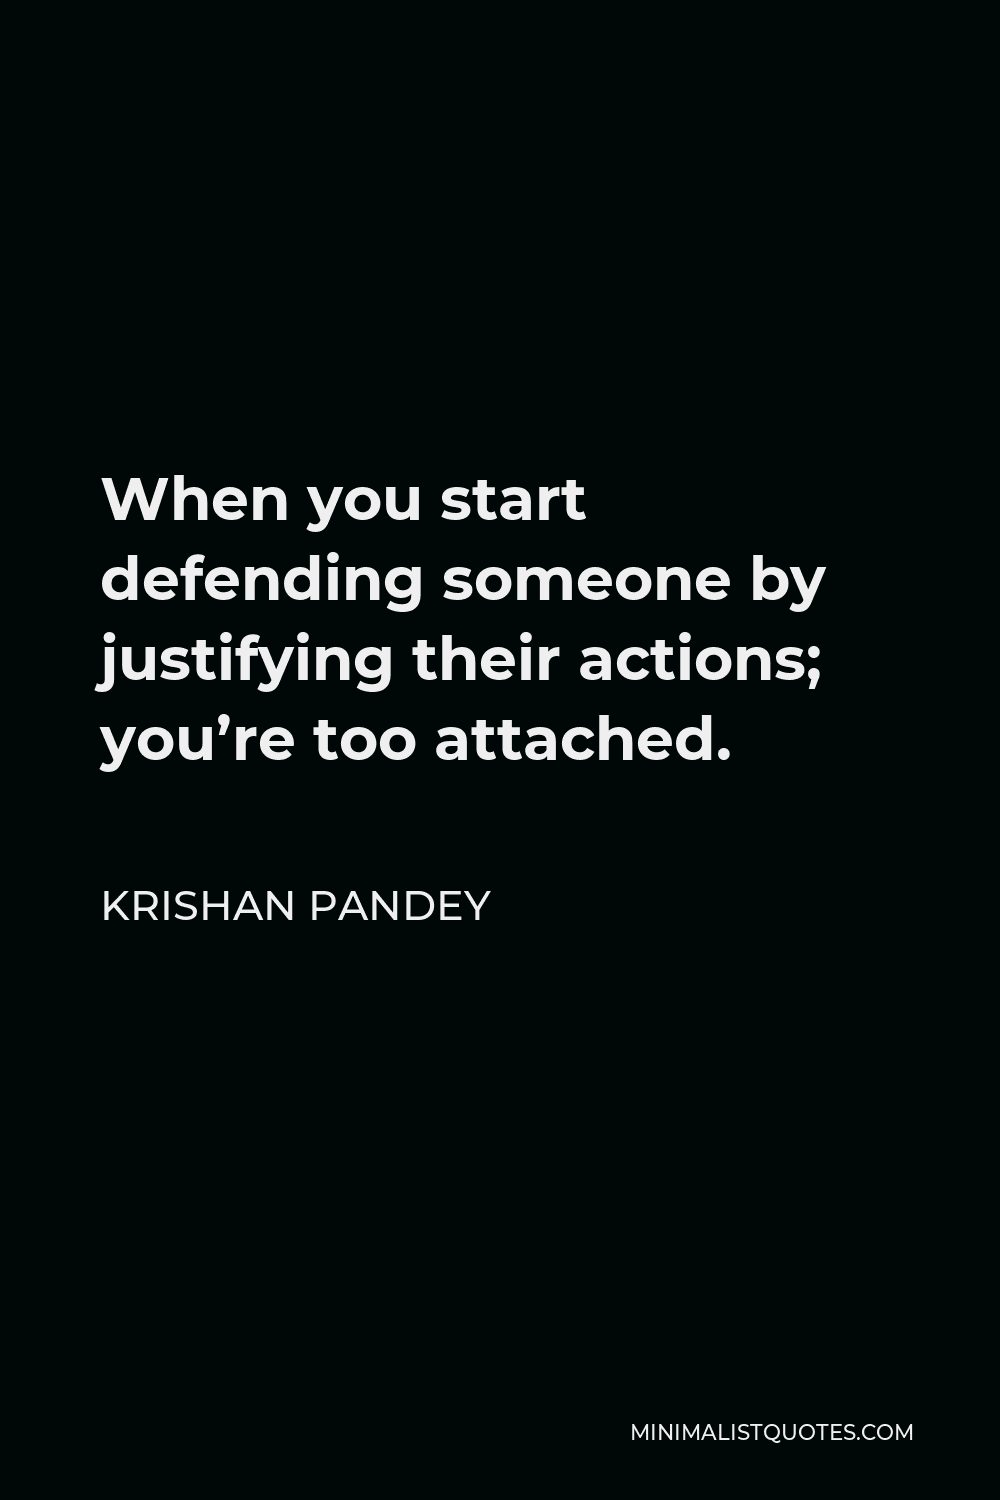 Krishan Pandey Quote - When you start defending someone by justifying their actions; you’re too attached.